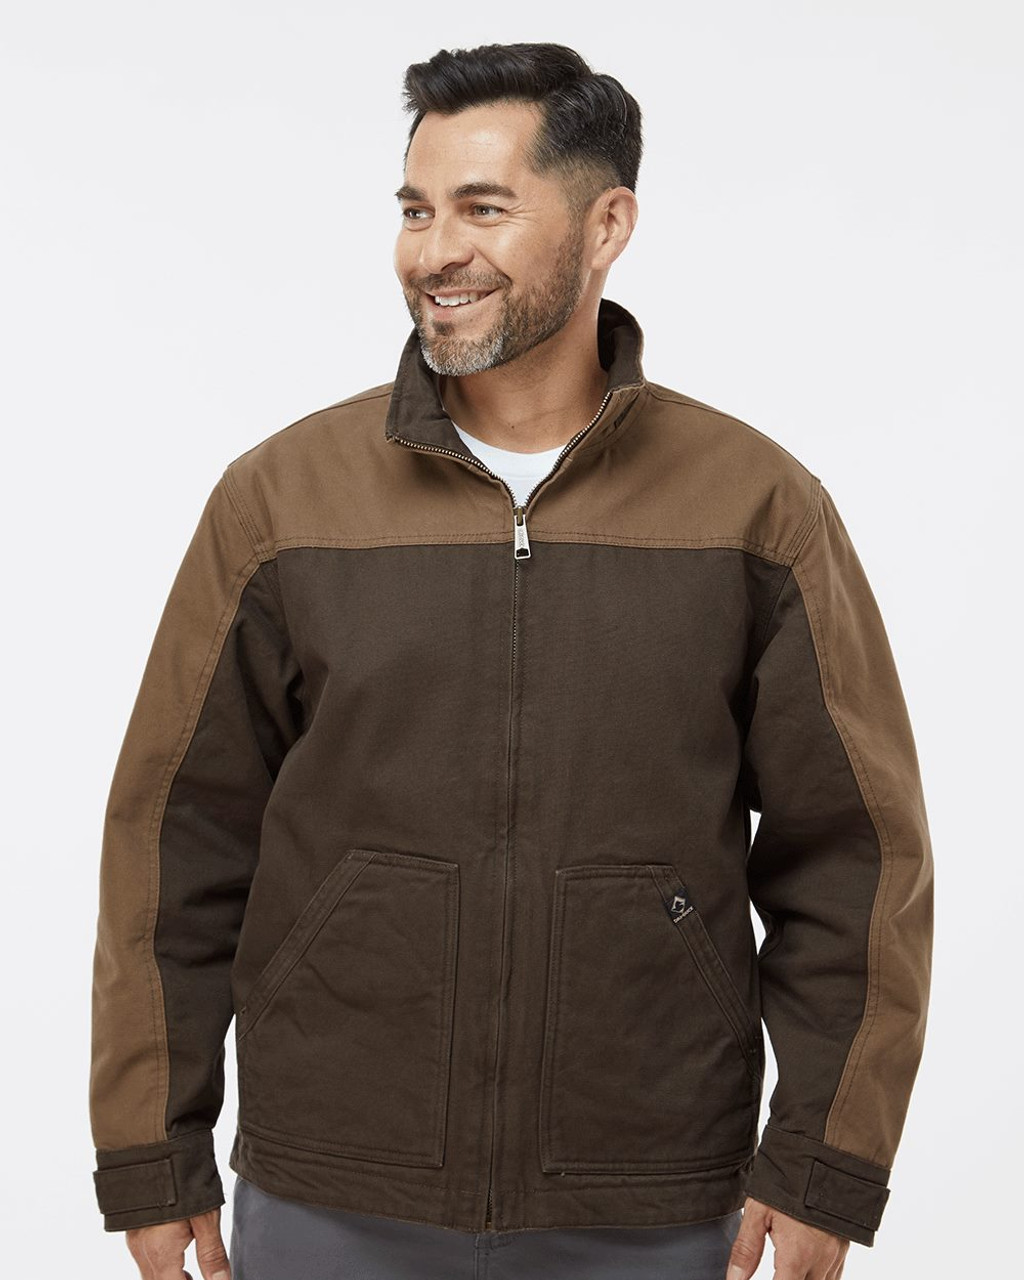 Embroidered Horizon Two-Tone Boulder Cloth™ Canvas Jacket Tall Size - 5089T